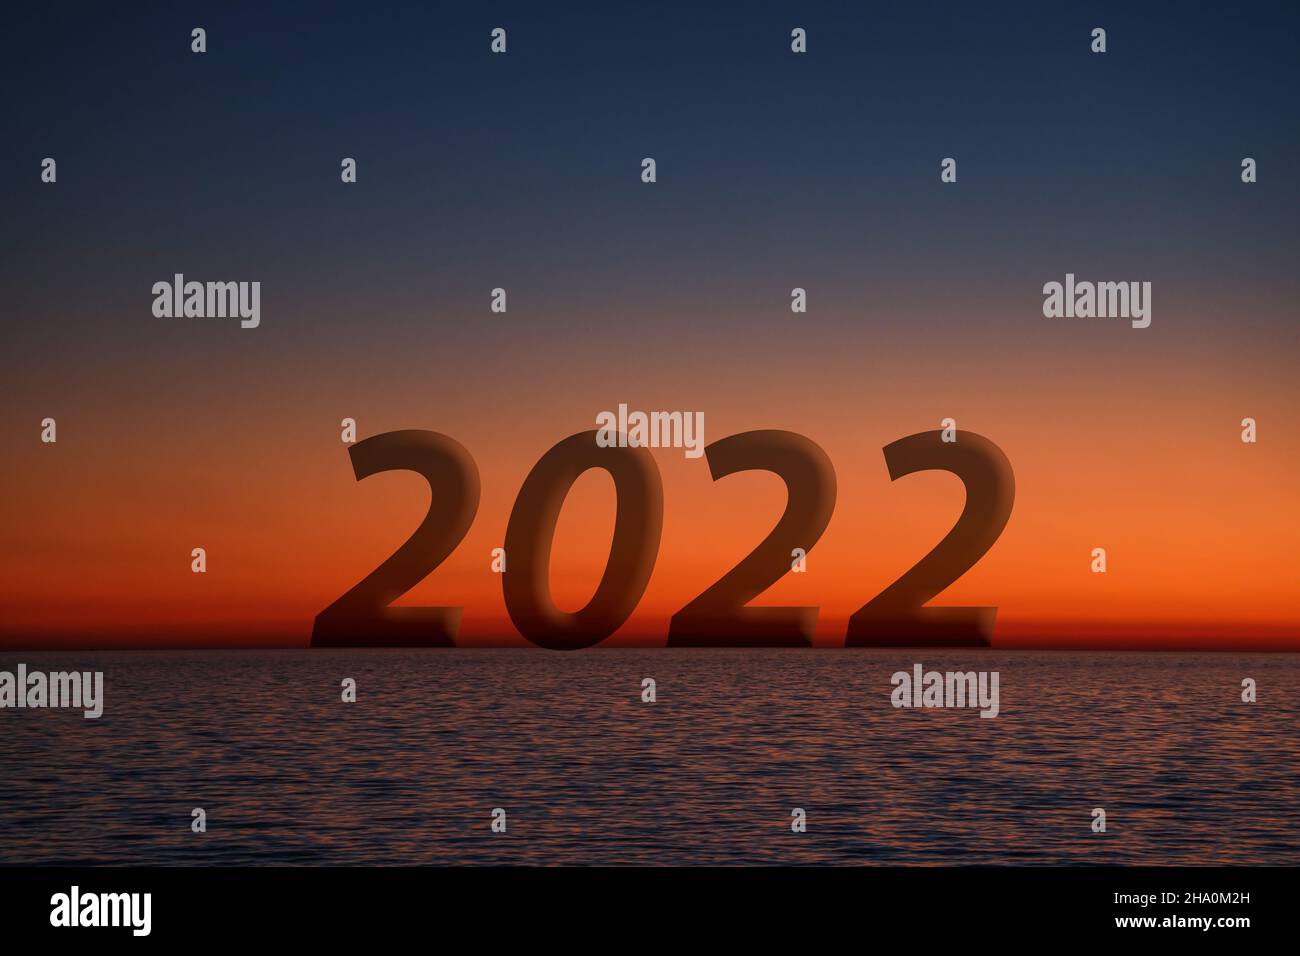 The silhouette of Number 2022 on Horizon at sunset with Orange and Red colors Background, New Year 2022. Beautiful sunset over the ocean. Copy Space. Stock Photo